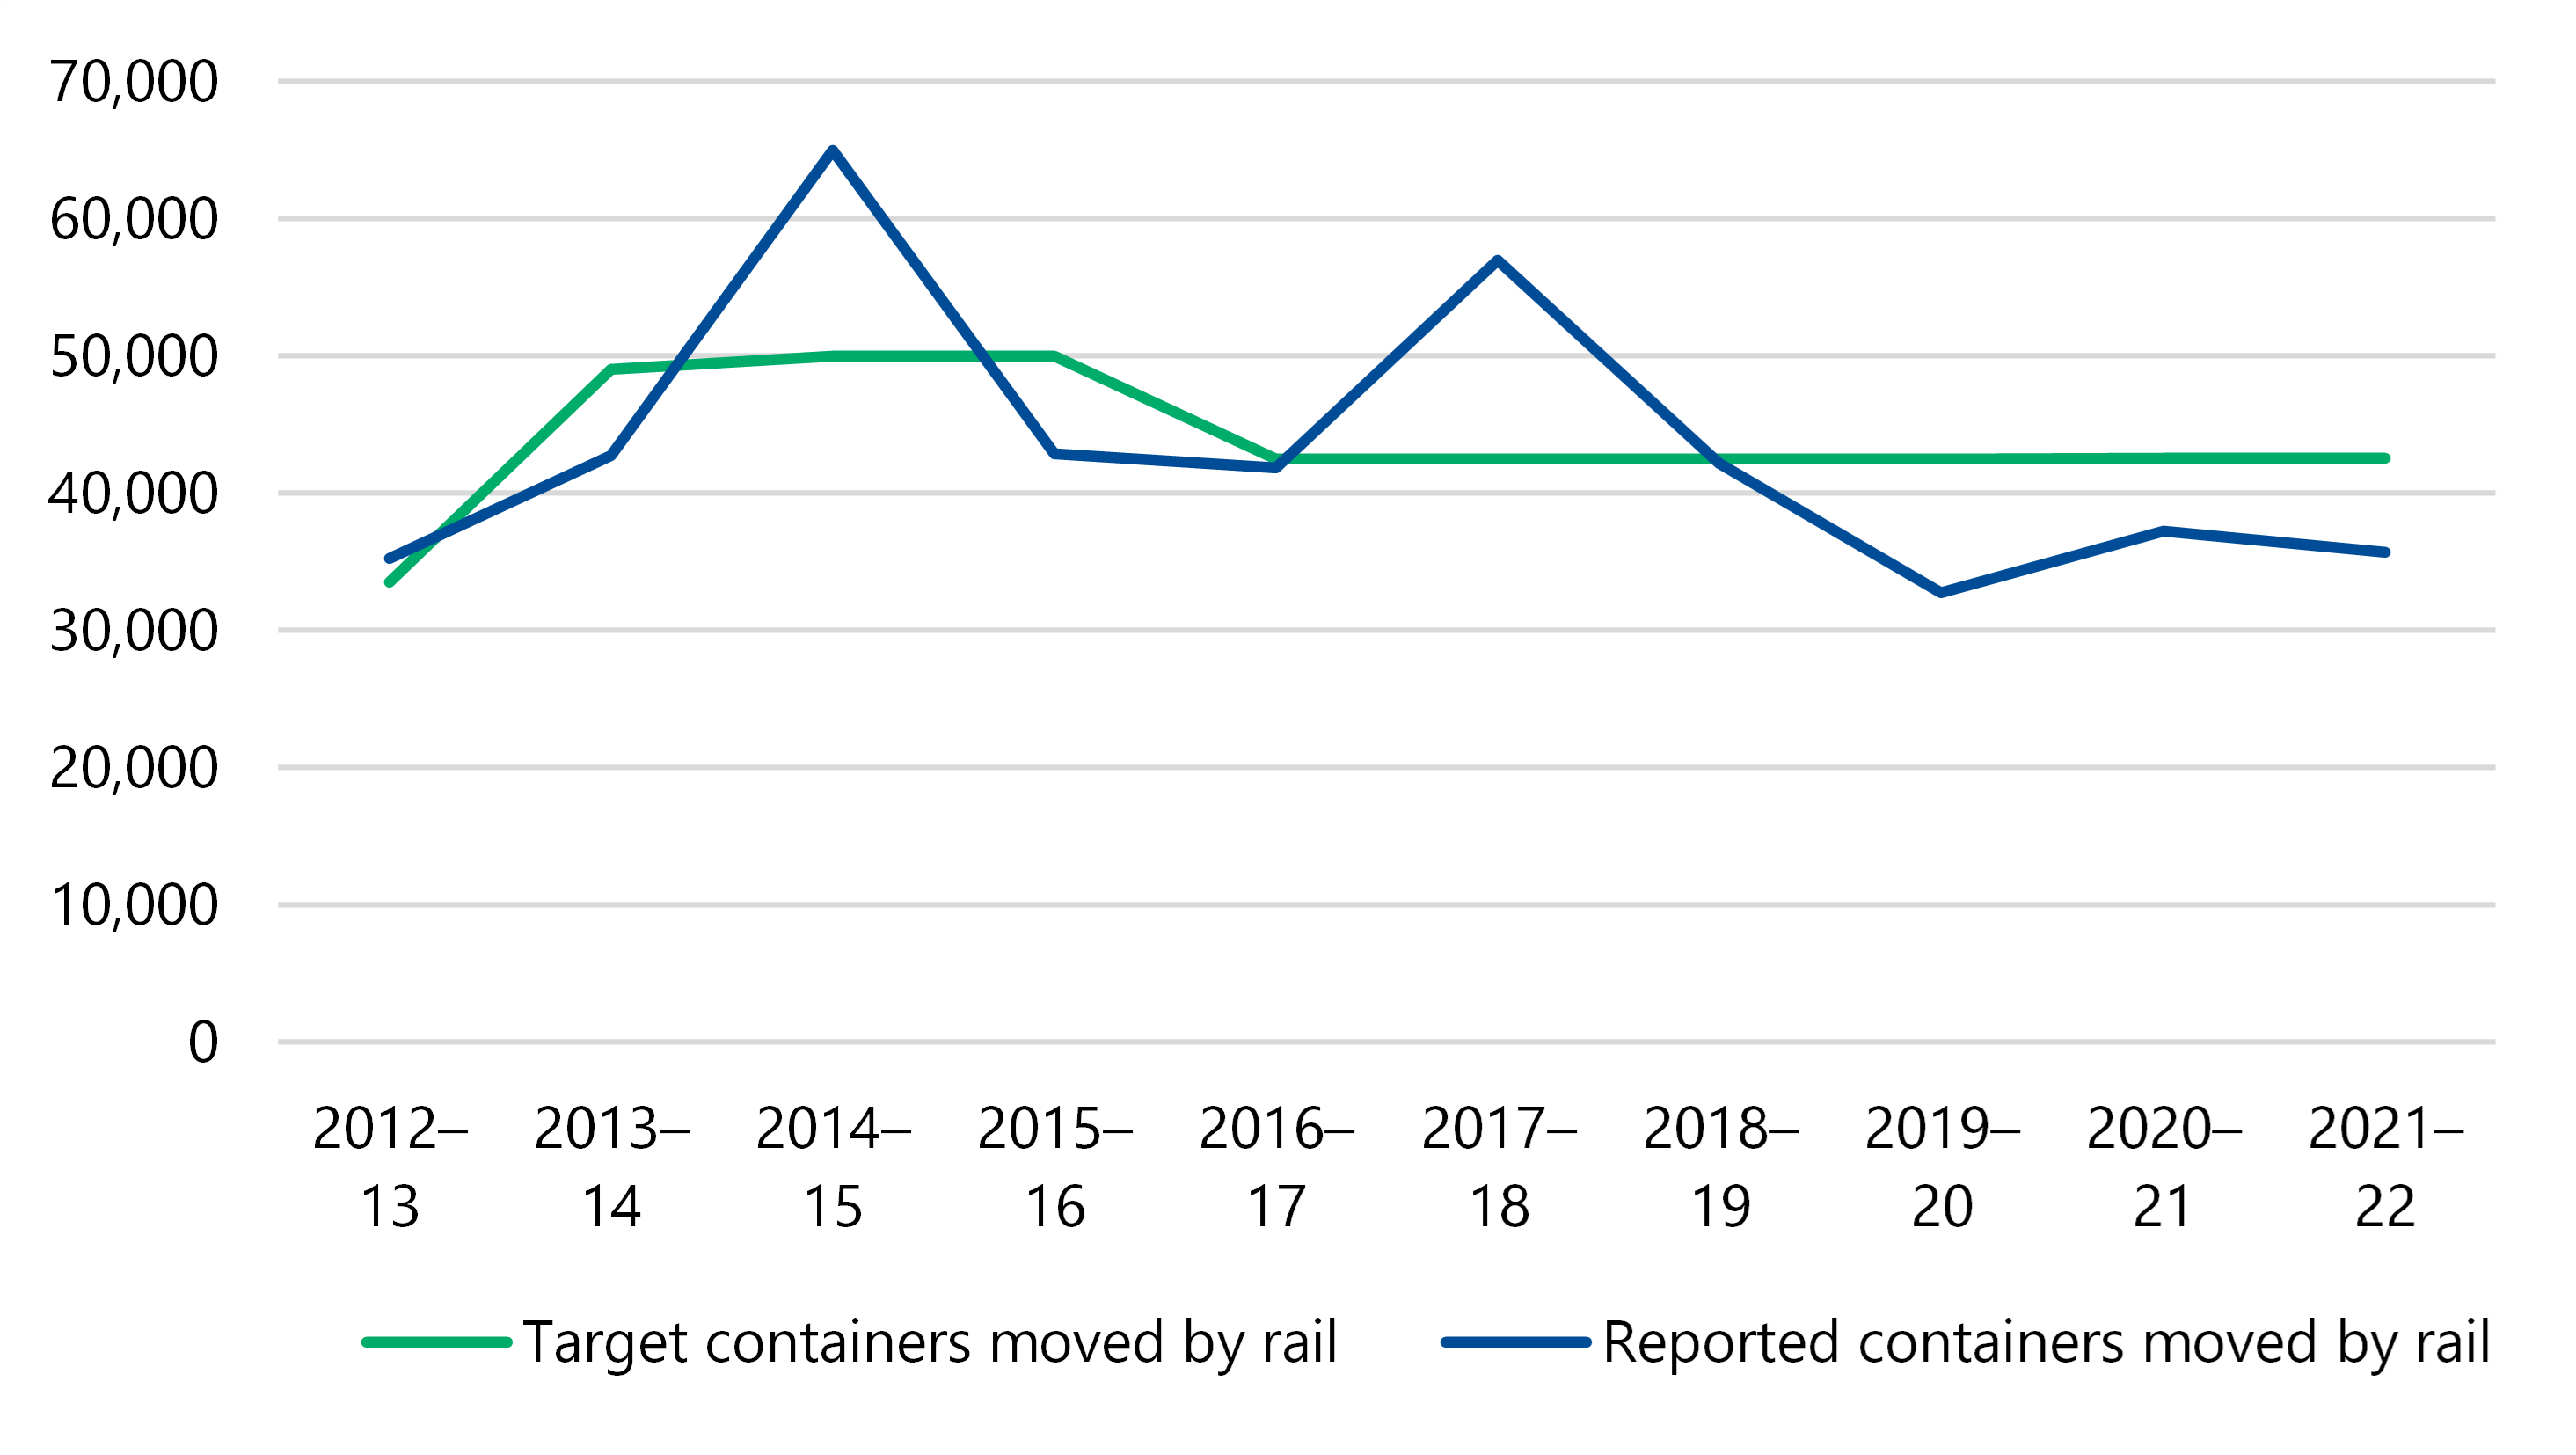 Targets for containers moved annually by rail between 2012–13 and 2021–22 were between about 35,000 and 50,000, but reported containers varied from about 32,000 to 65,000, with peaks in 2014–15 and 2017–18 and the lowest figure being in 2019–22.